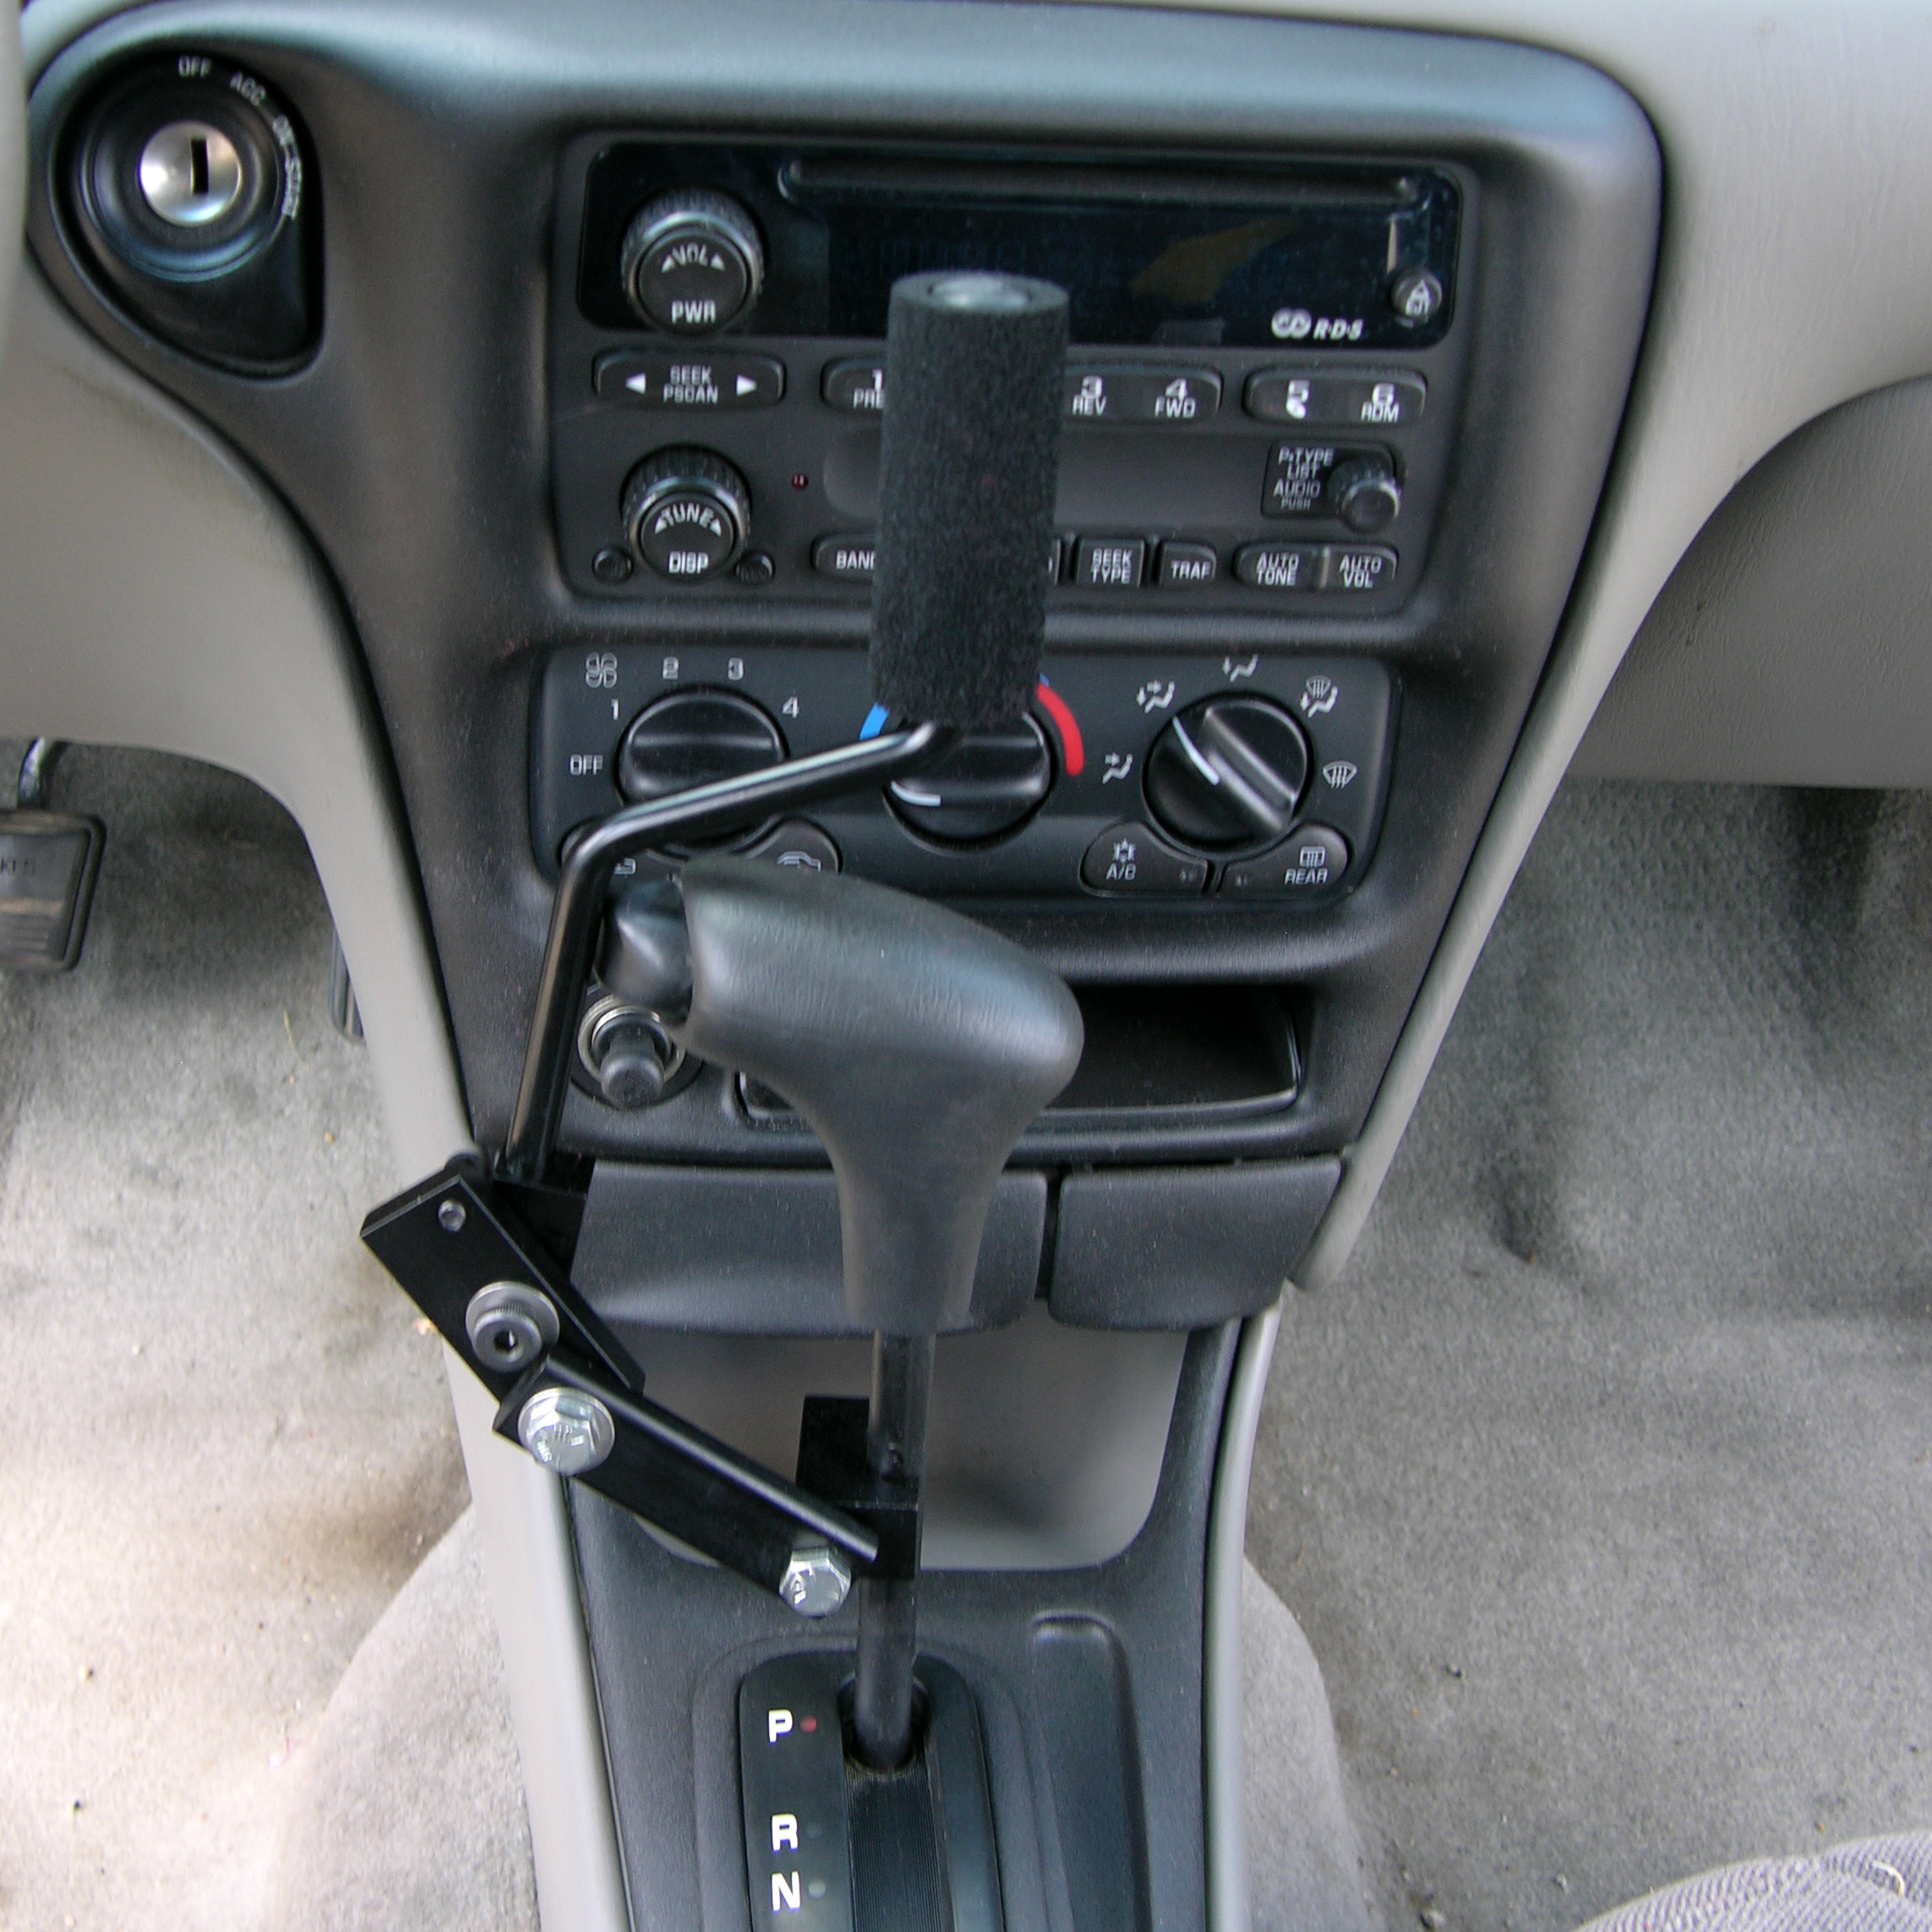 T-Handle Style Gear Shift Our T-Handle Style Gear Shift extension enables the driver to push in the gear shift button and move the gear shift lever in one easy motion.